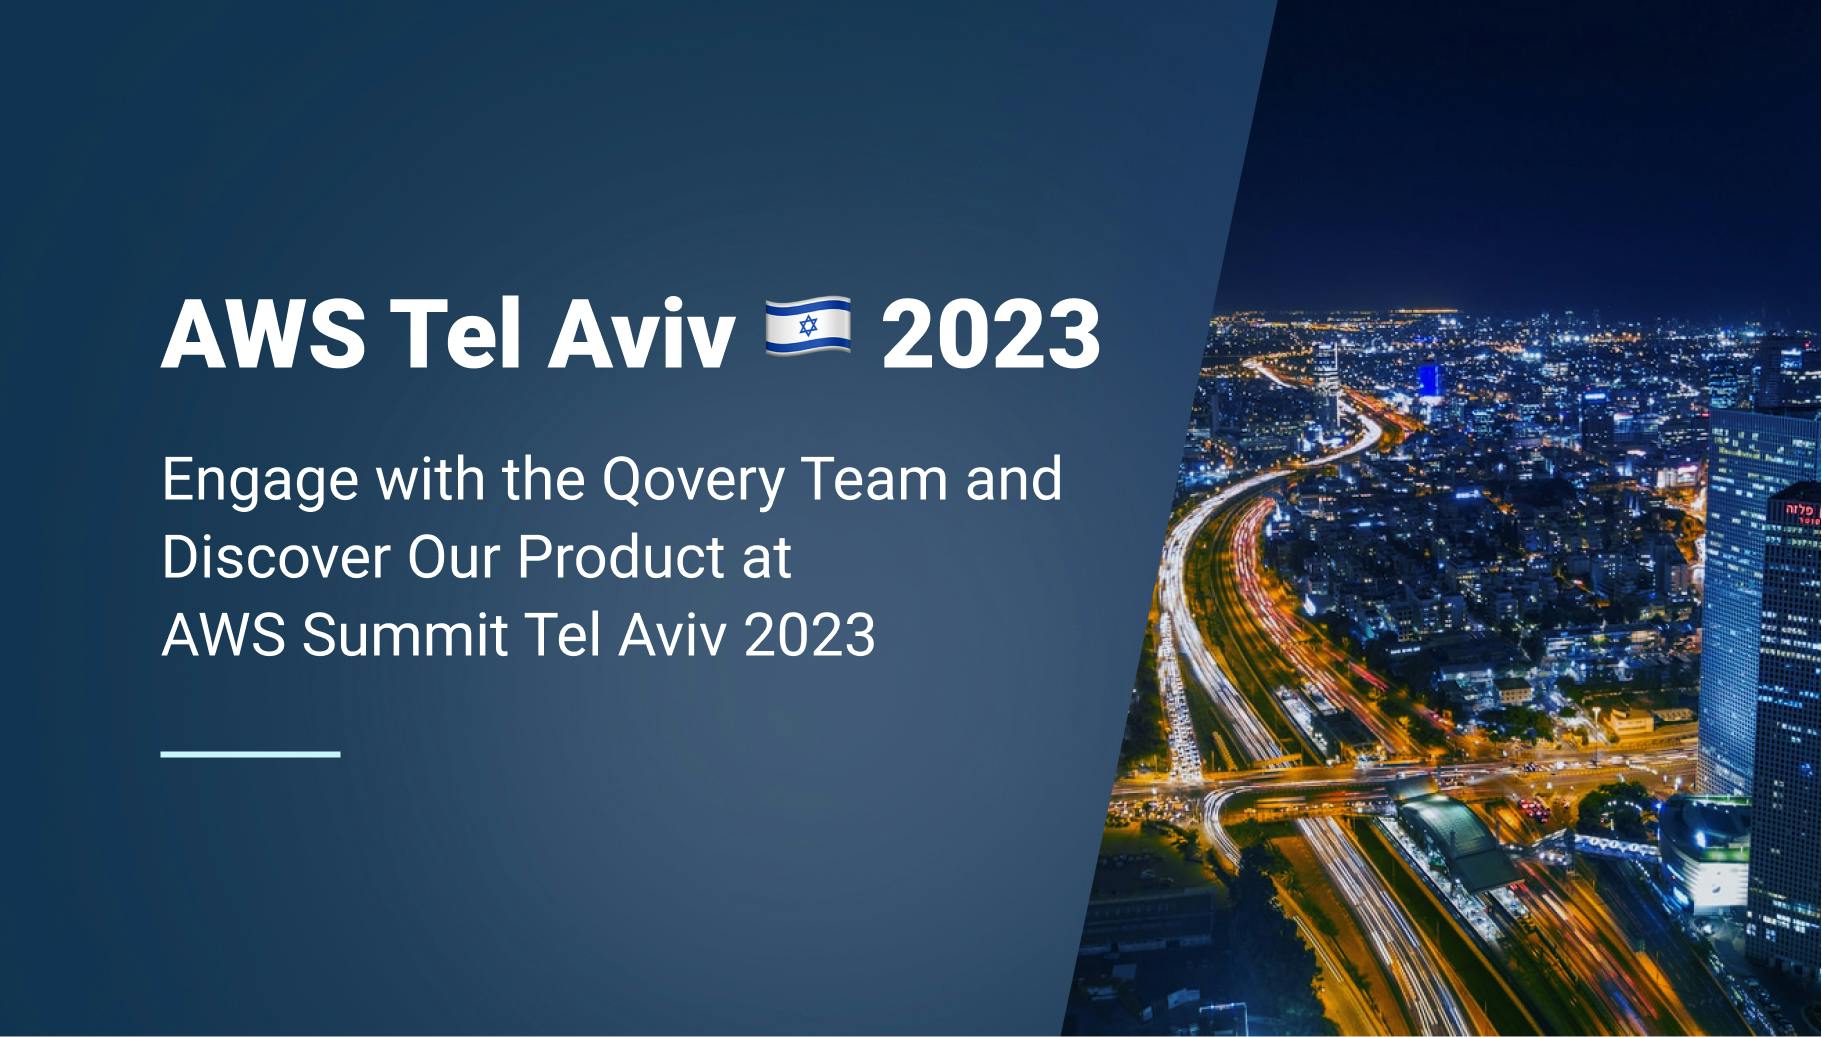 Meet Qovery at AWS Summit Tel Aviv 2023 - Engage with the Team and Discover Our Product! - Qovery